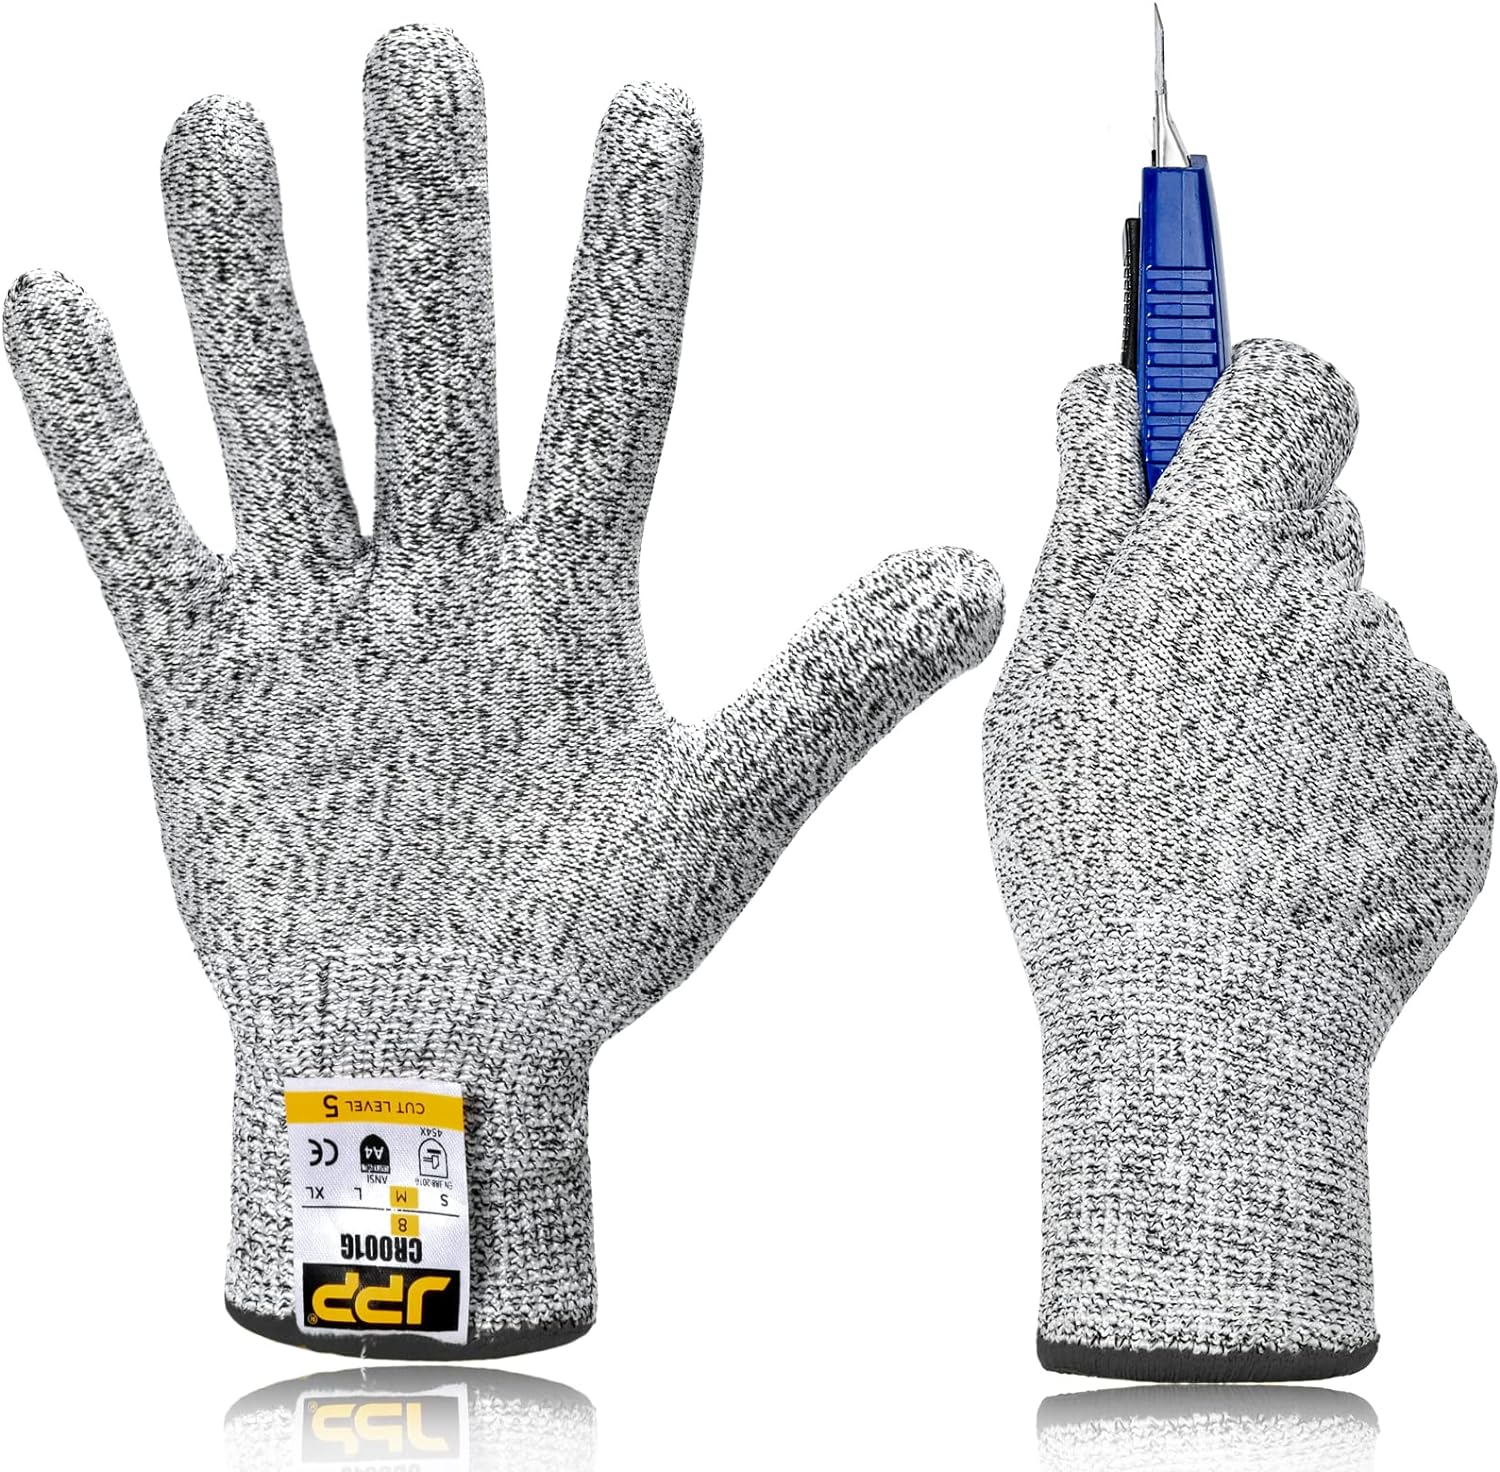 JPP Premium Cut Resistant Gloves, Cutting Proof CE Level 5 Protection